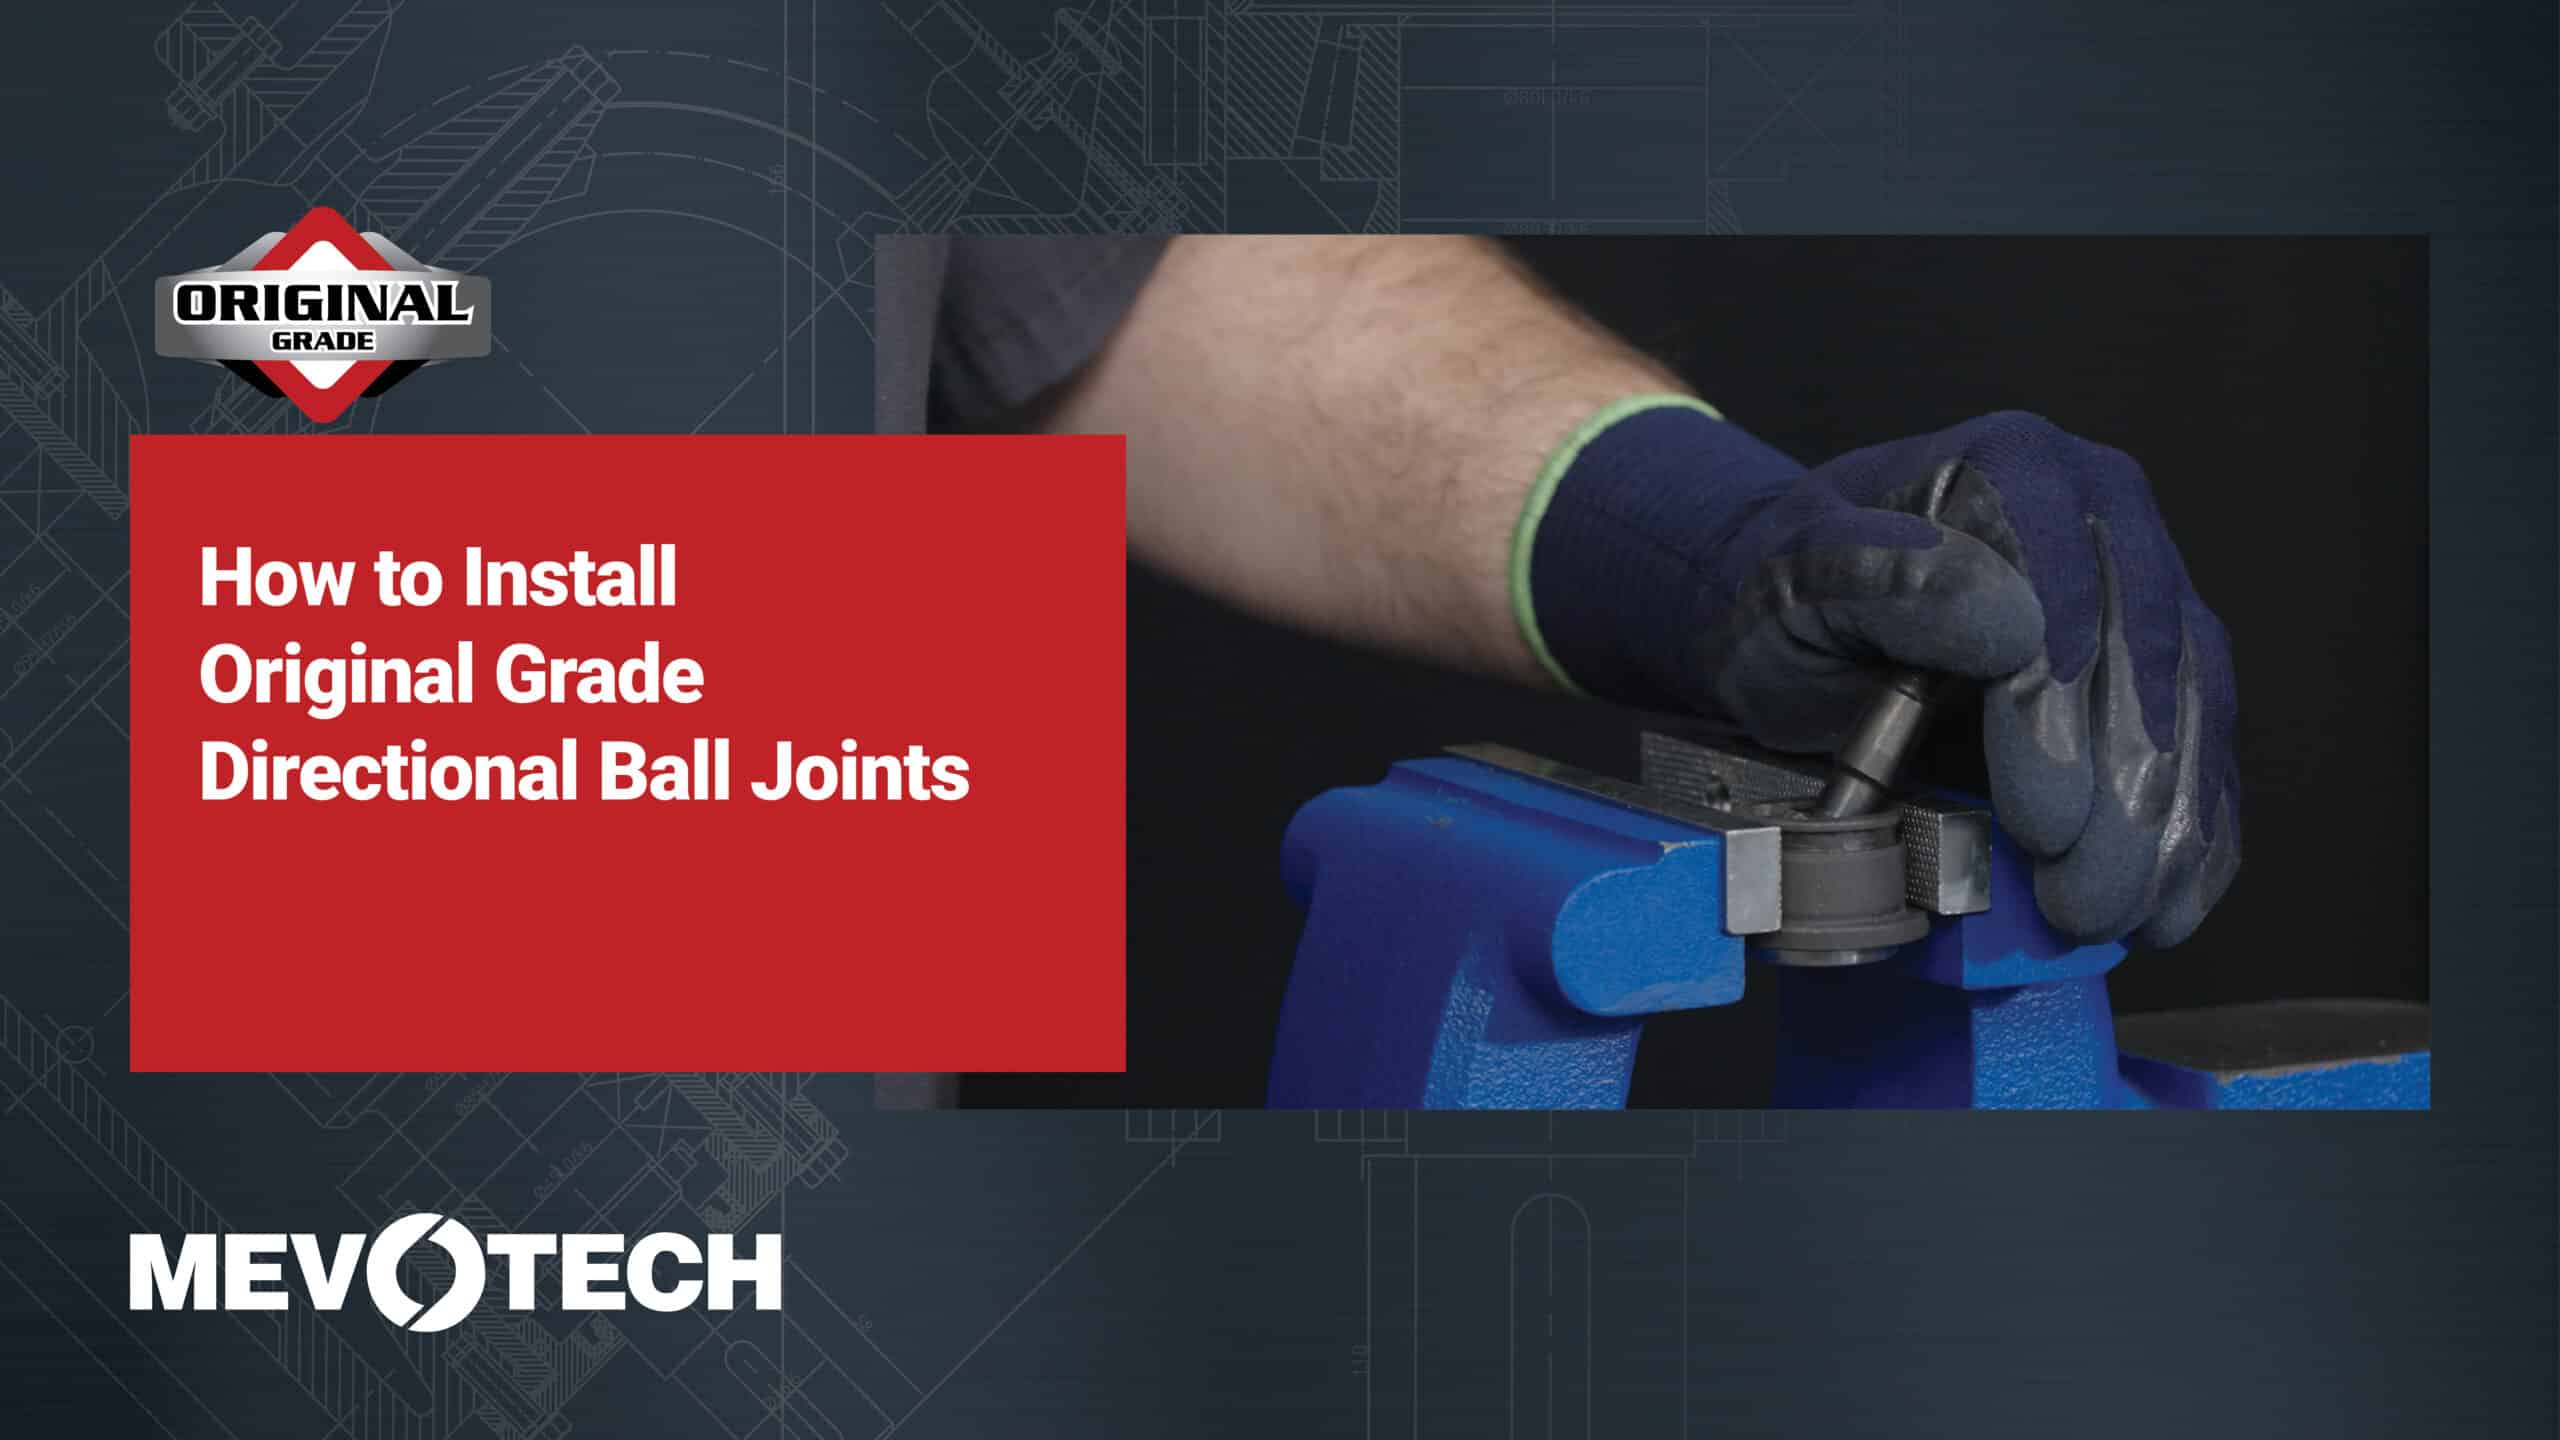 How to Install Original Grade Directional Ball Joints